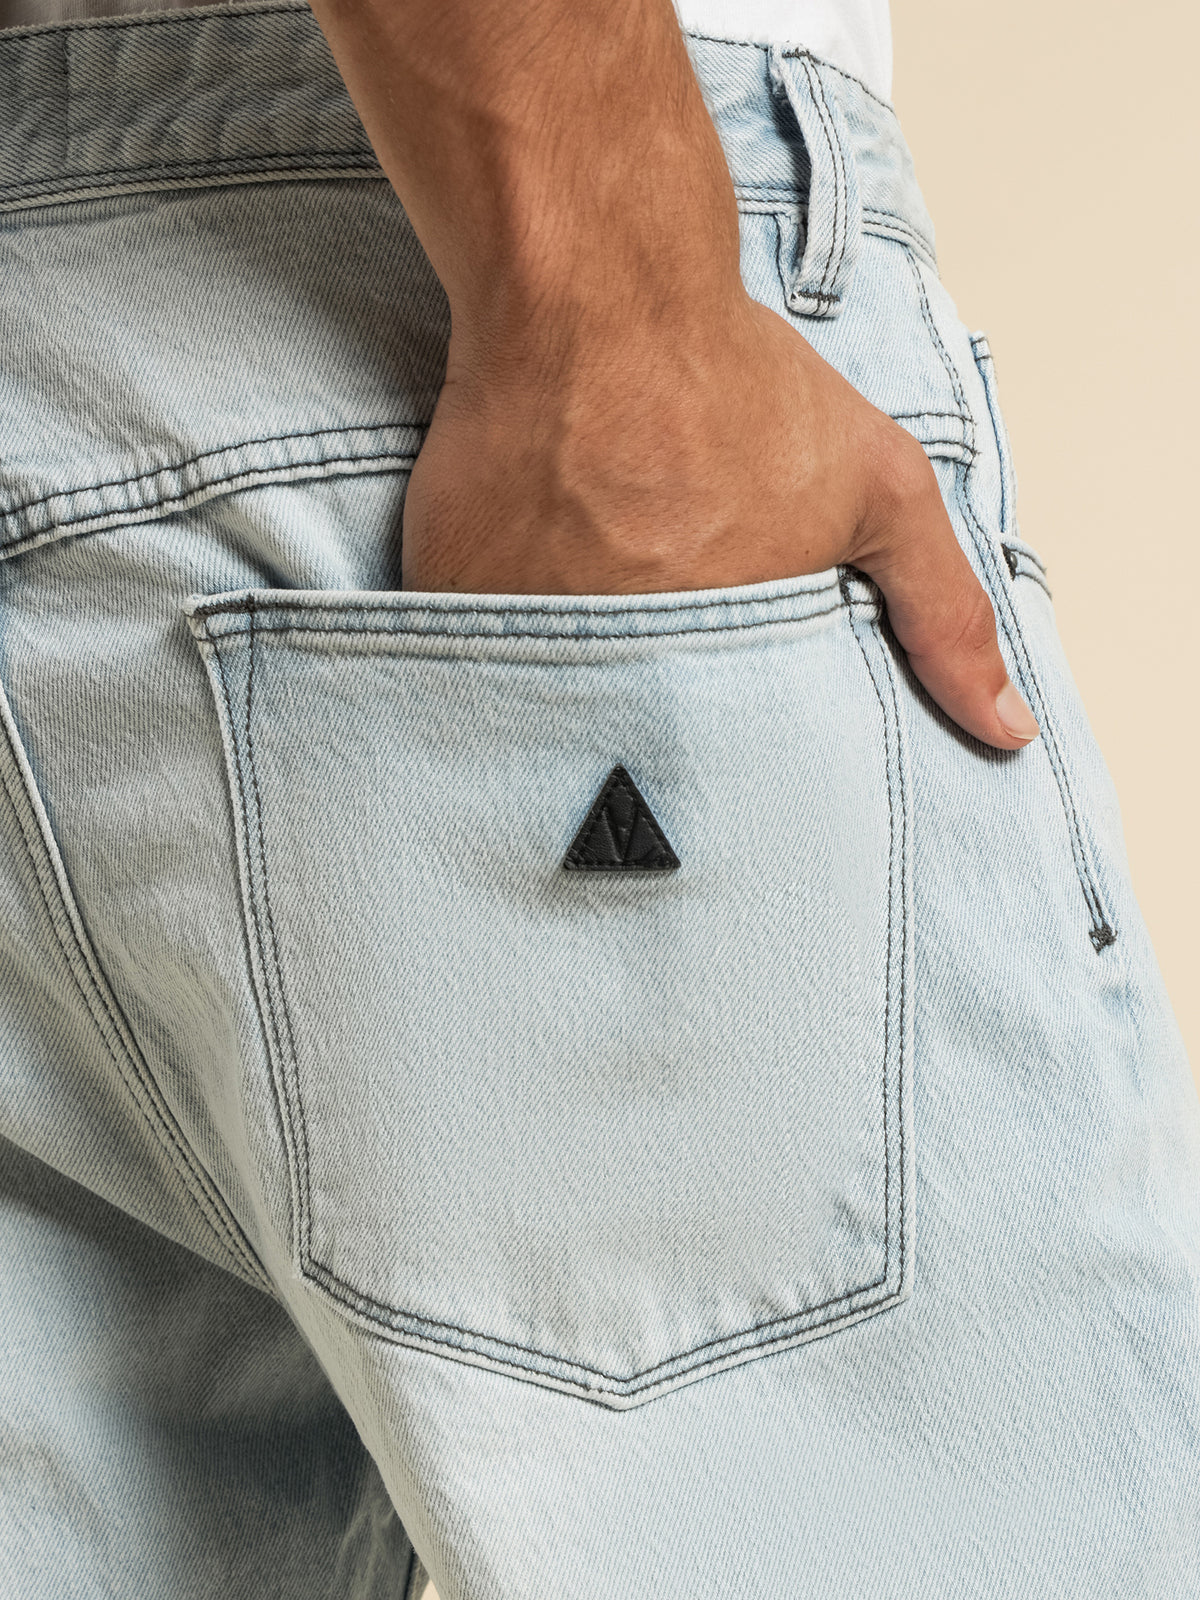 A Dropped Slim Turn Up Jeans in Parker Blue